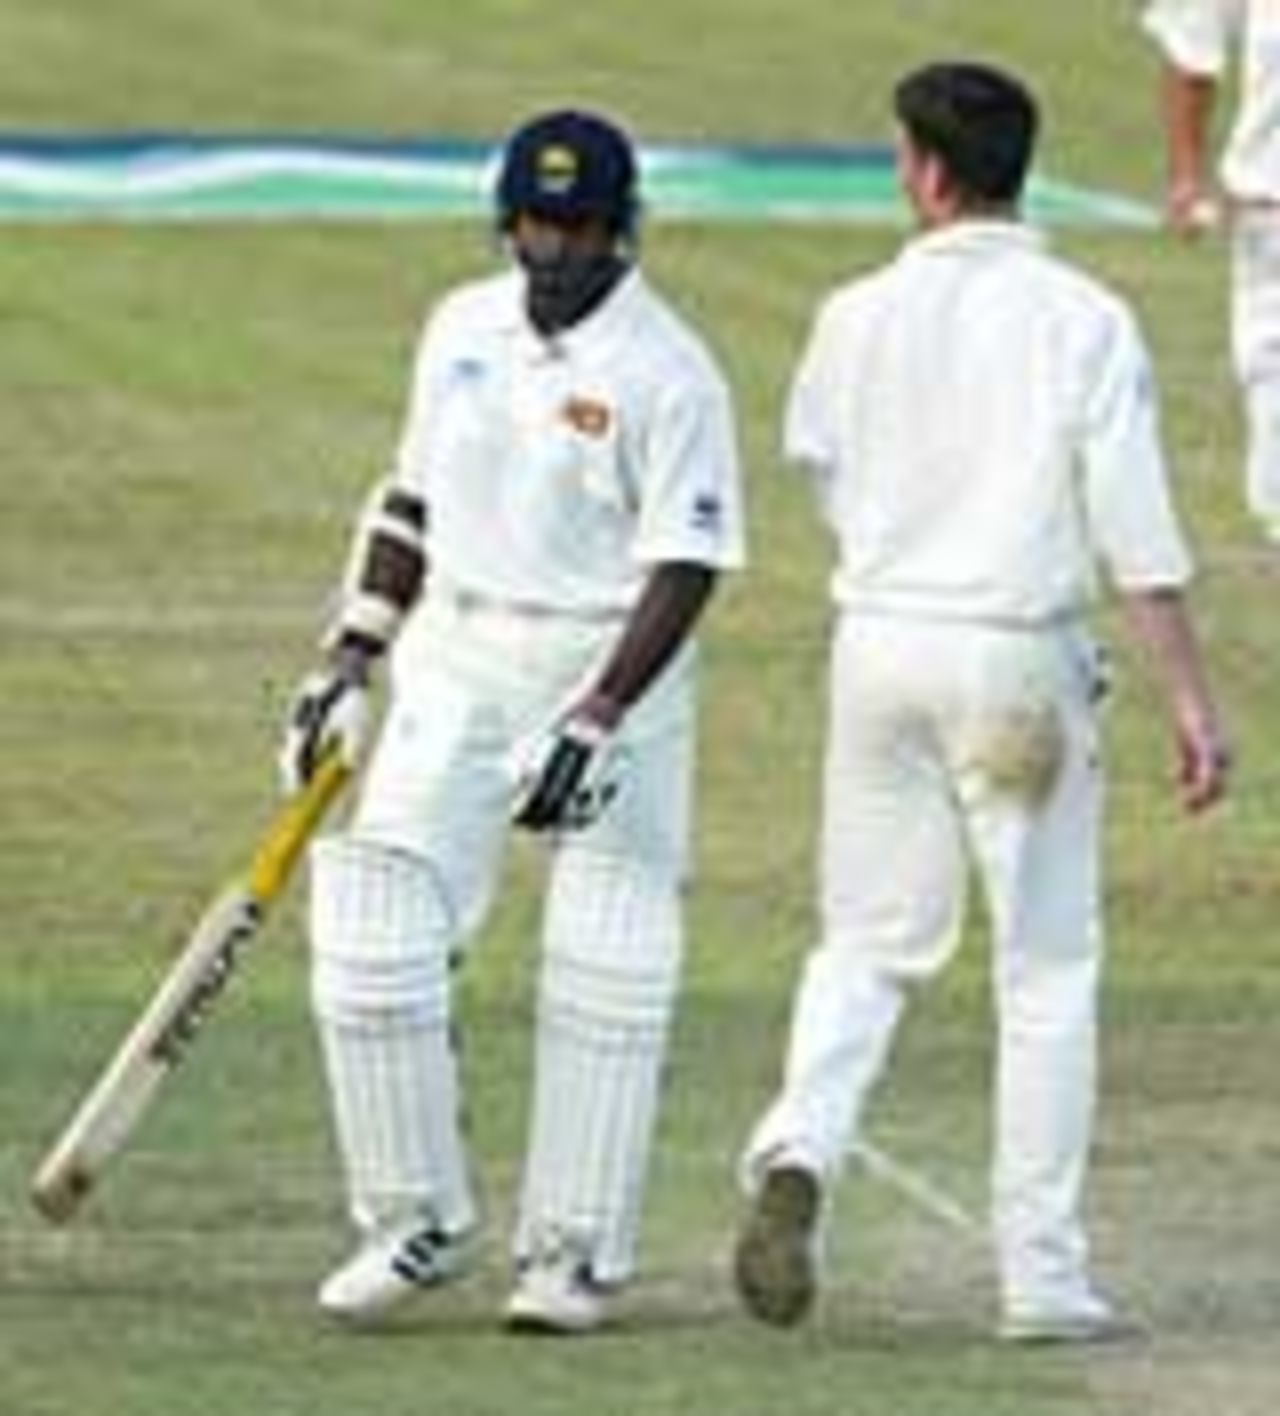 Flashpoint - James Kirtley send Chaminda Vaas on his way with a few words of advice. He was later reprimanded by the match referee, Sri Lanka v England, 2nd Test, Galle, December 10, 2003